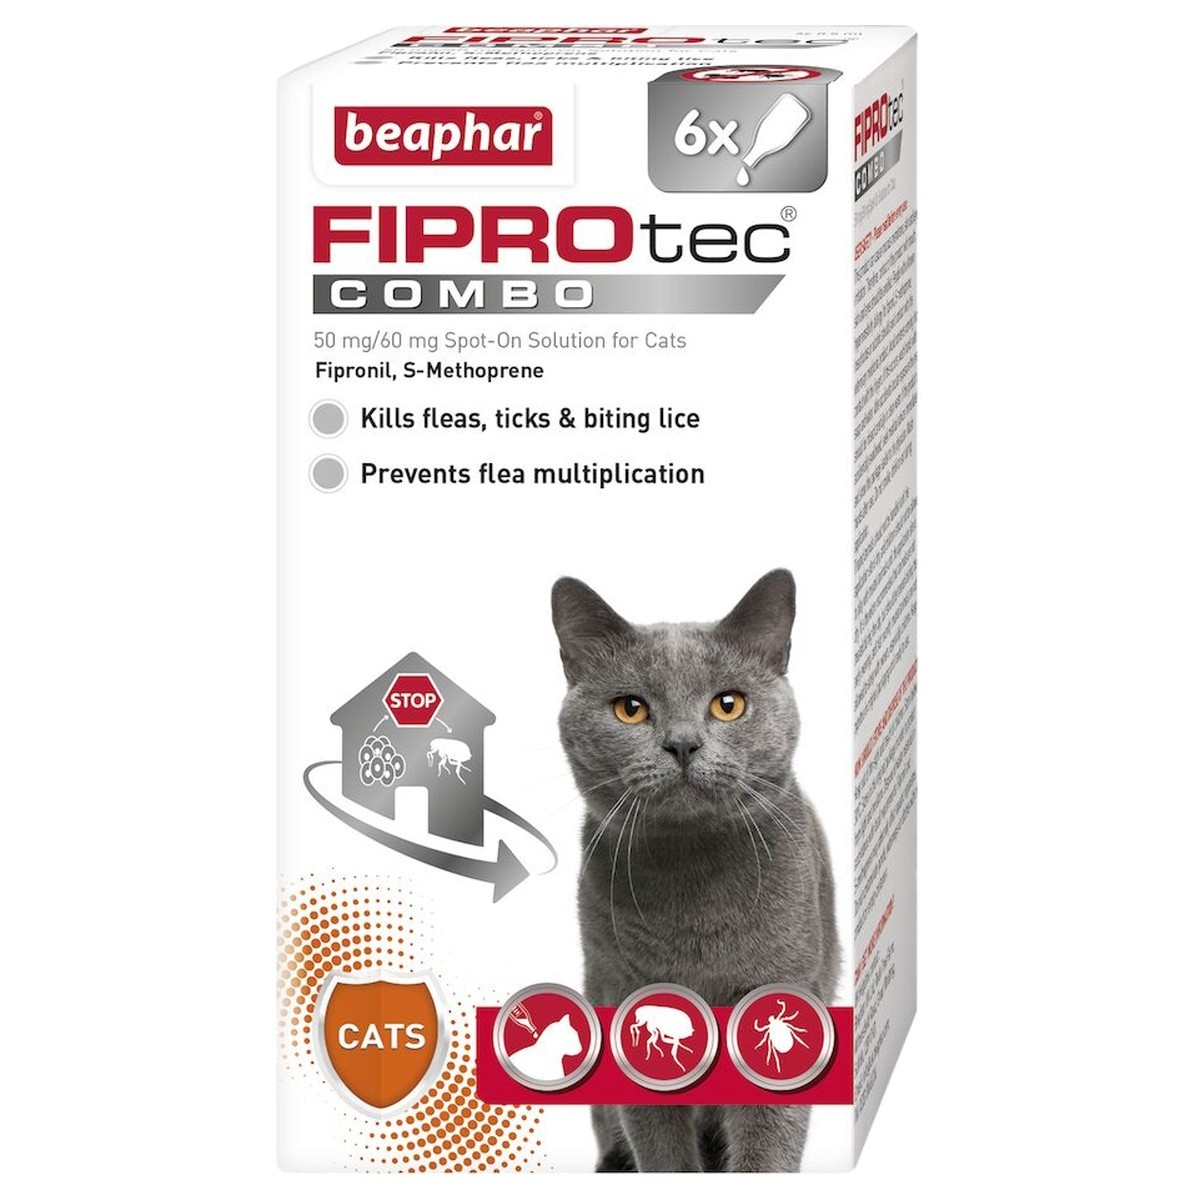 Beaphar FIPROtec Combo Spot-On Solution for Cats - From £13.42